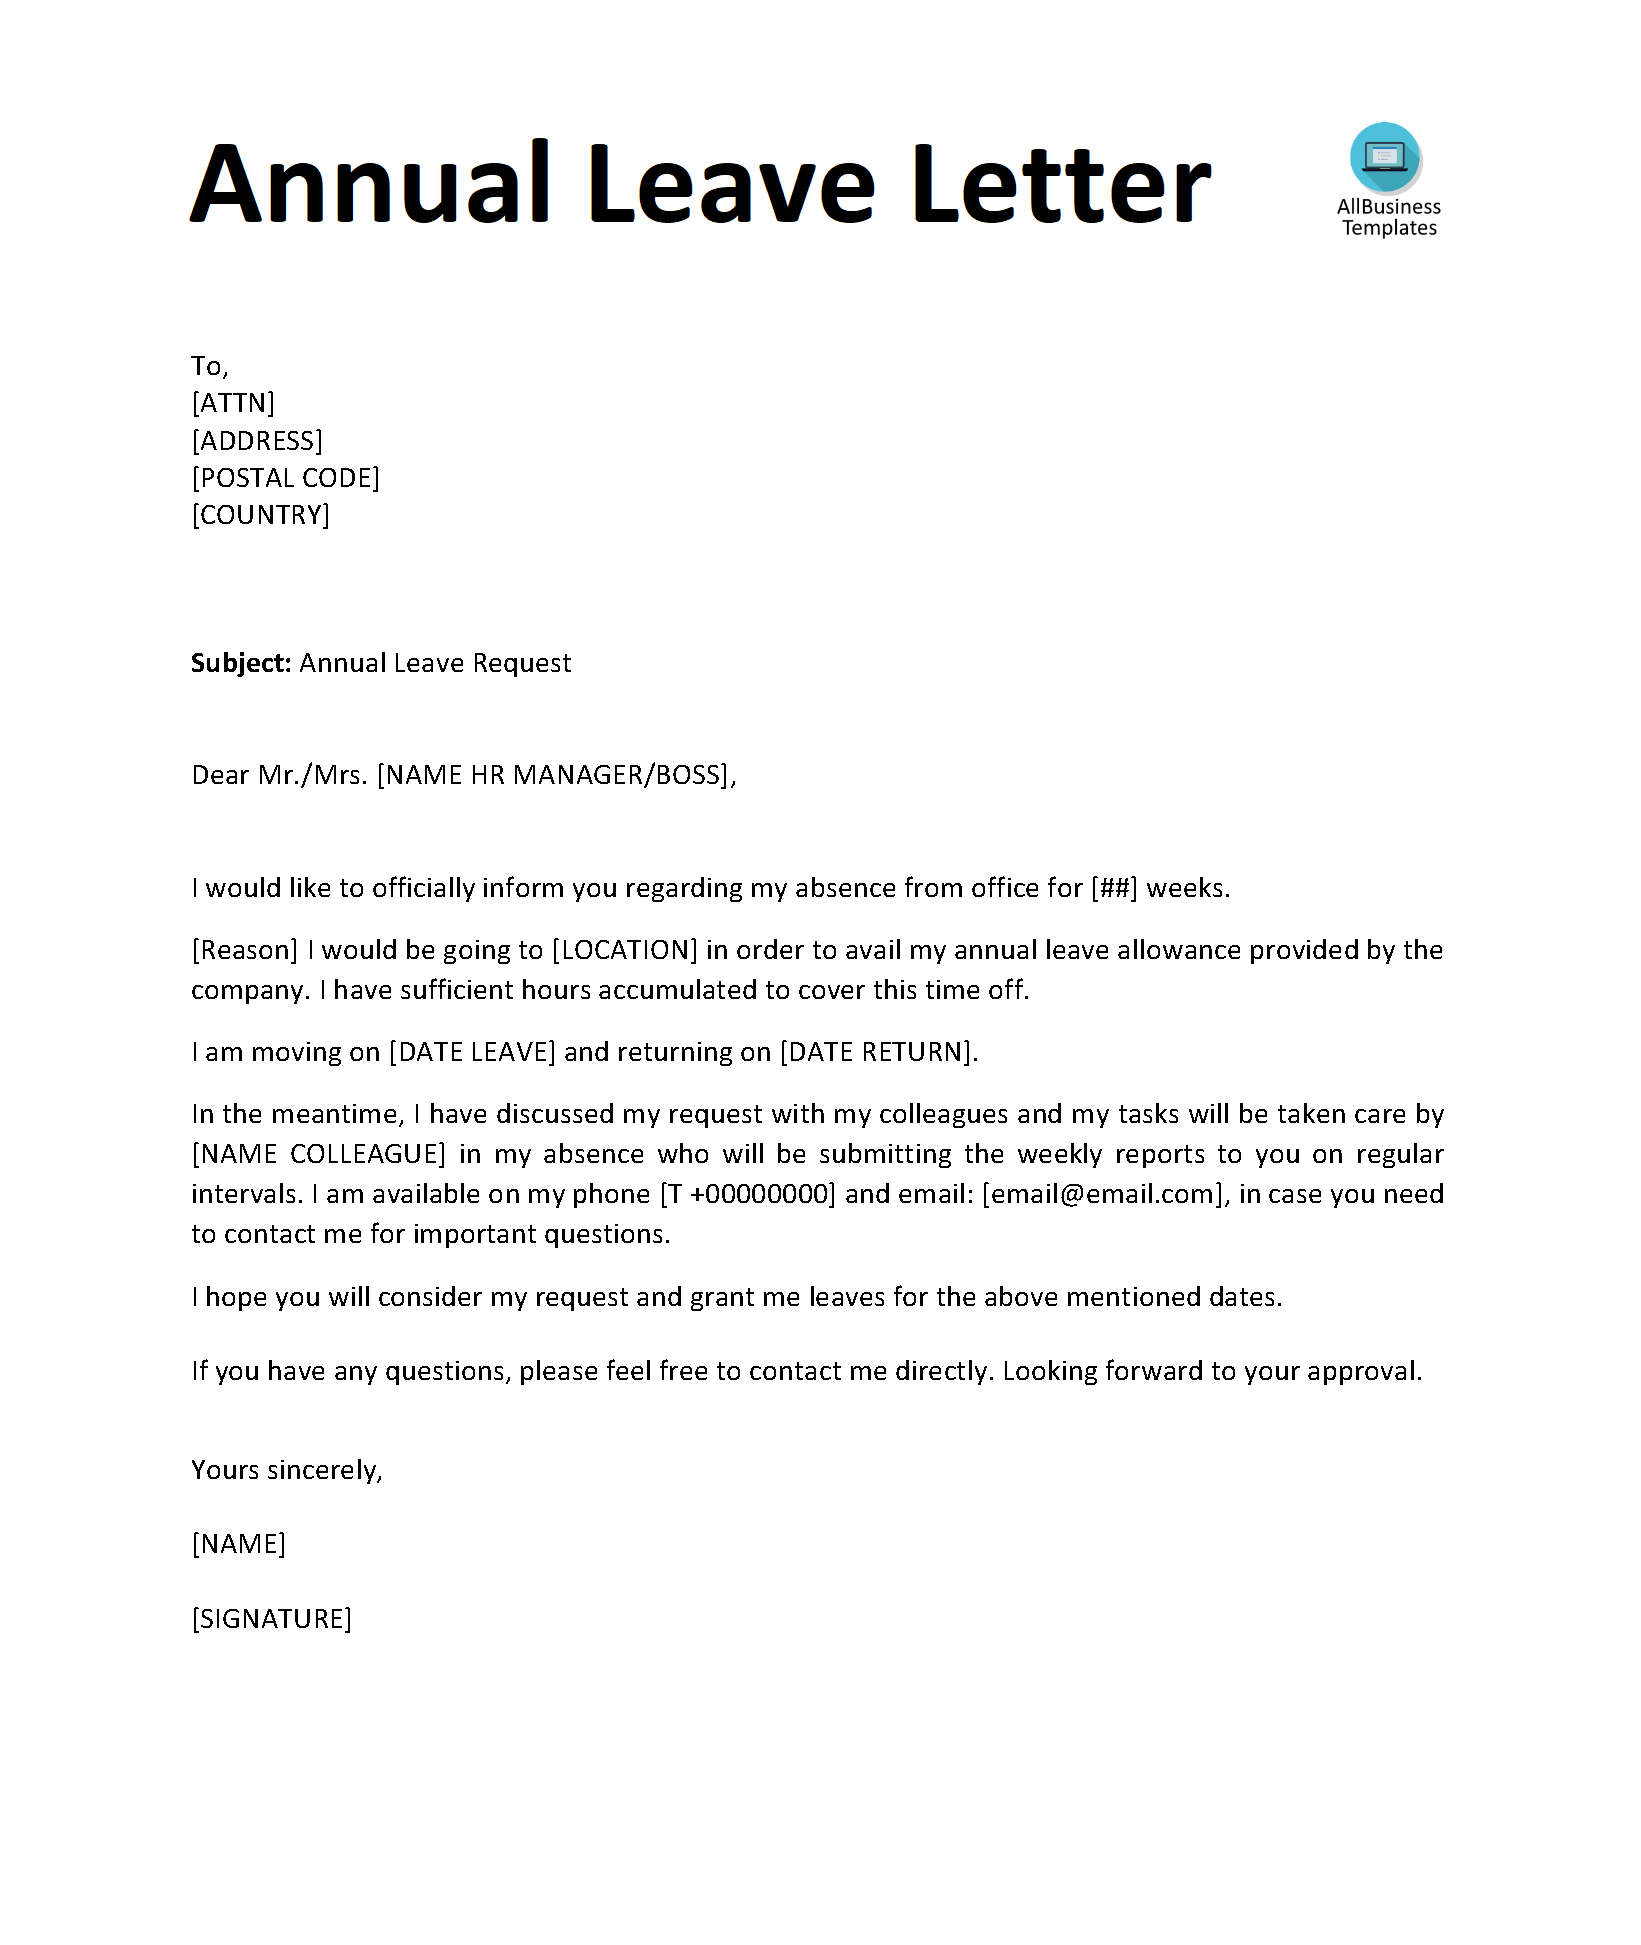 Kostenloses Annual Leave Letter